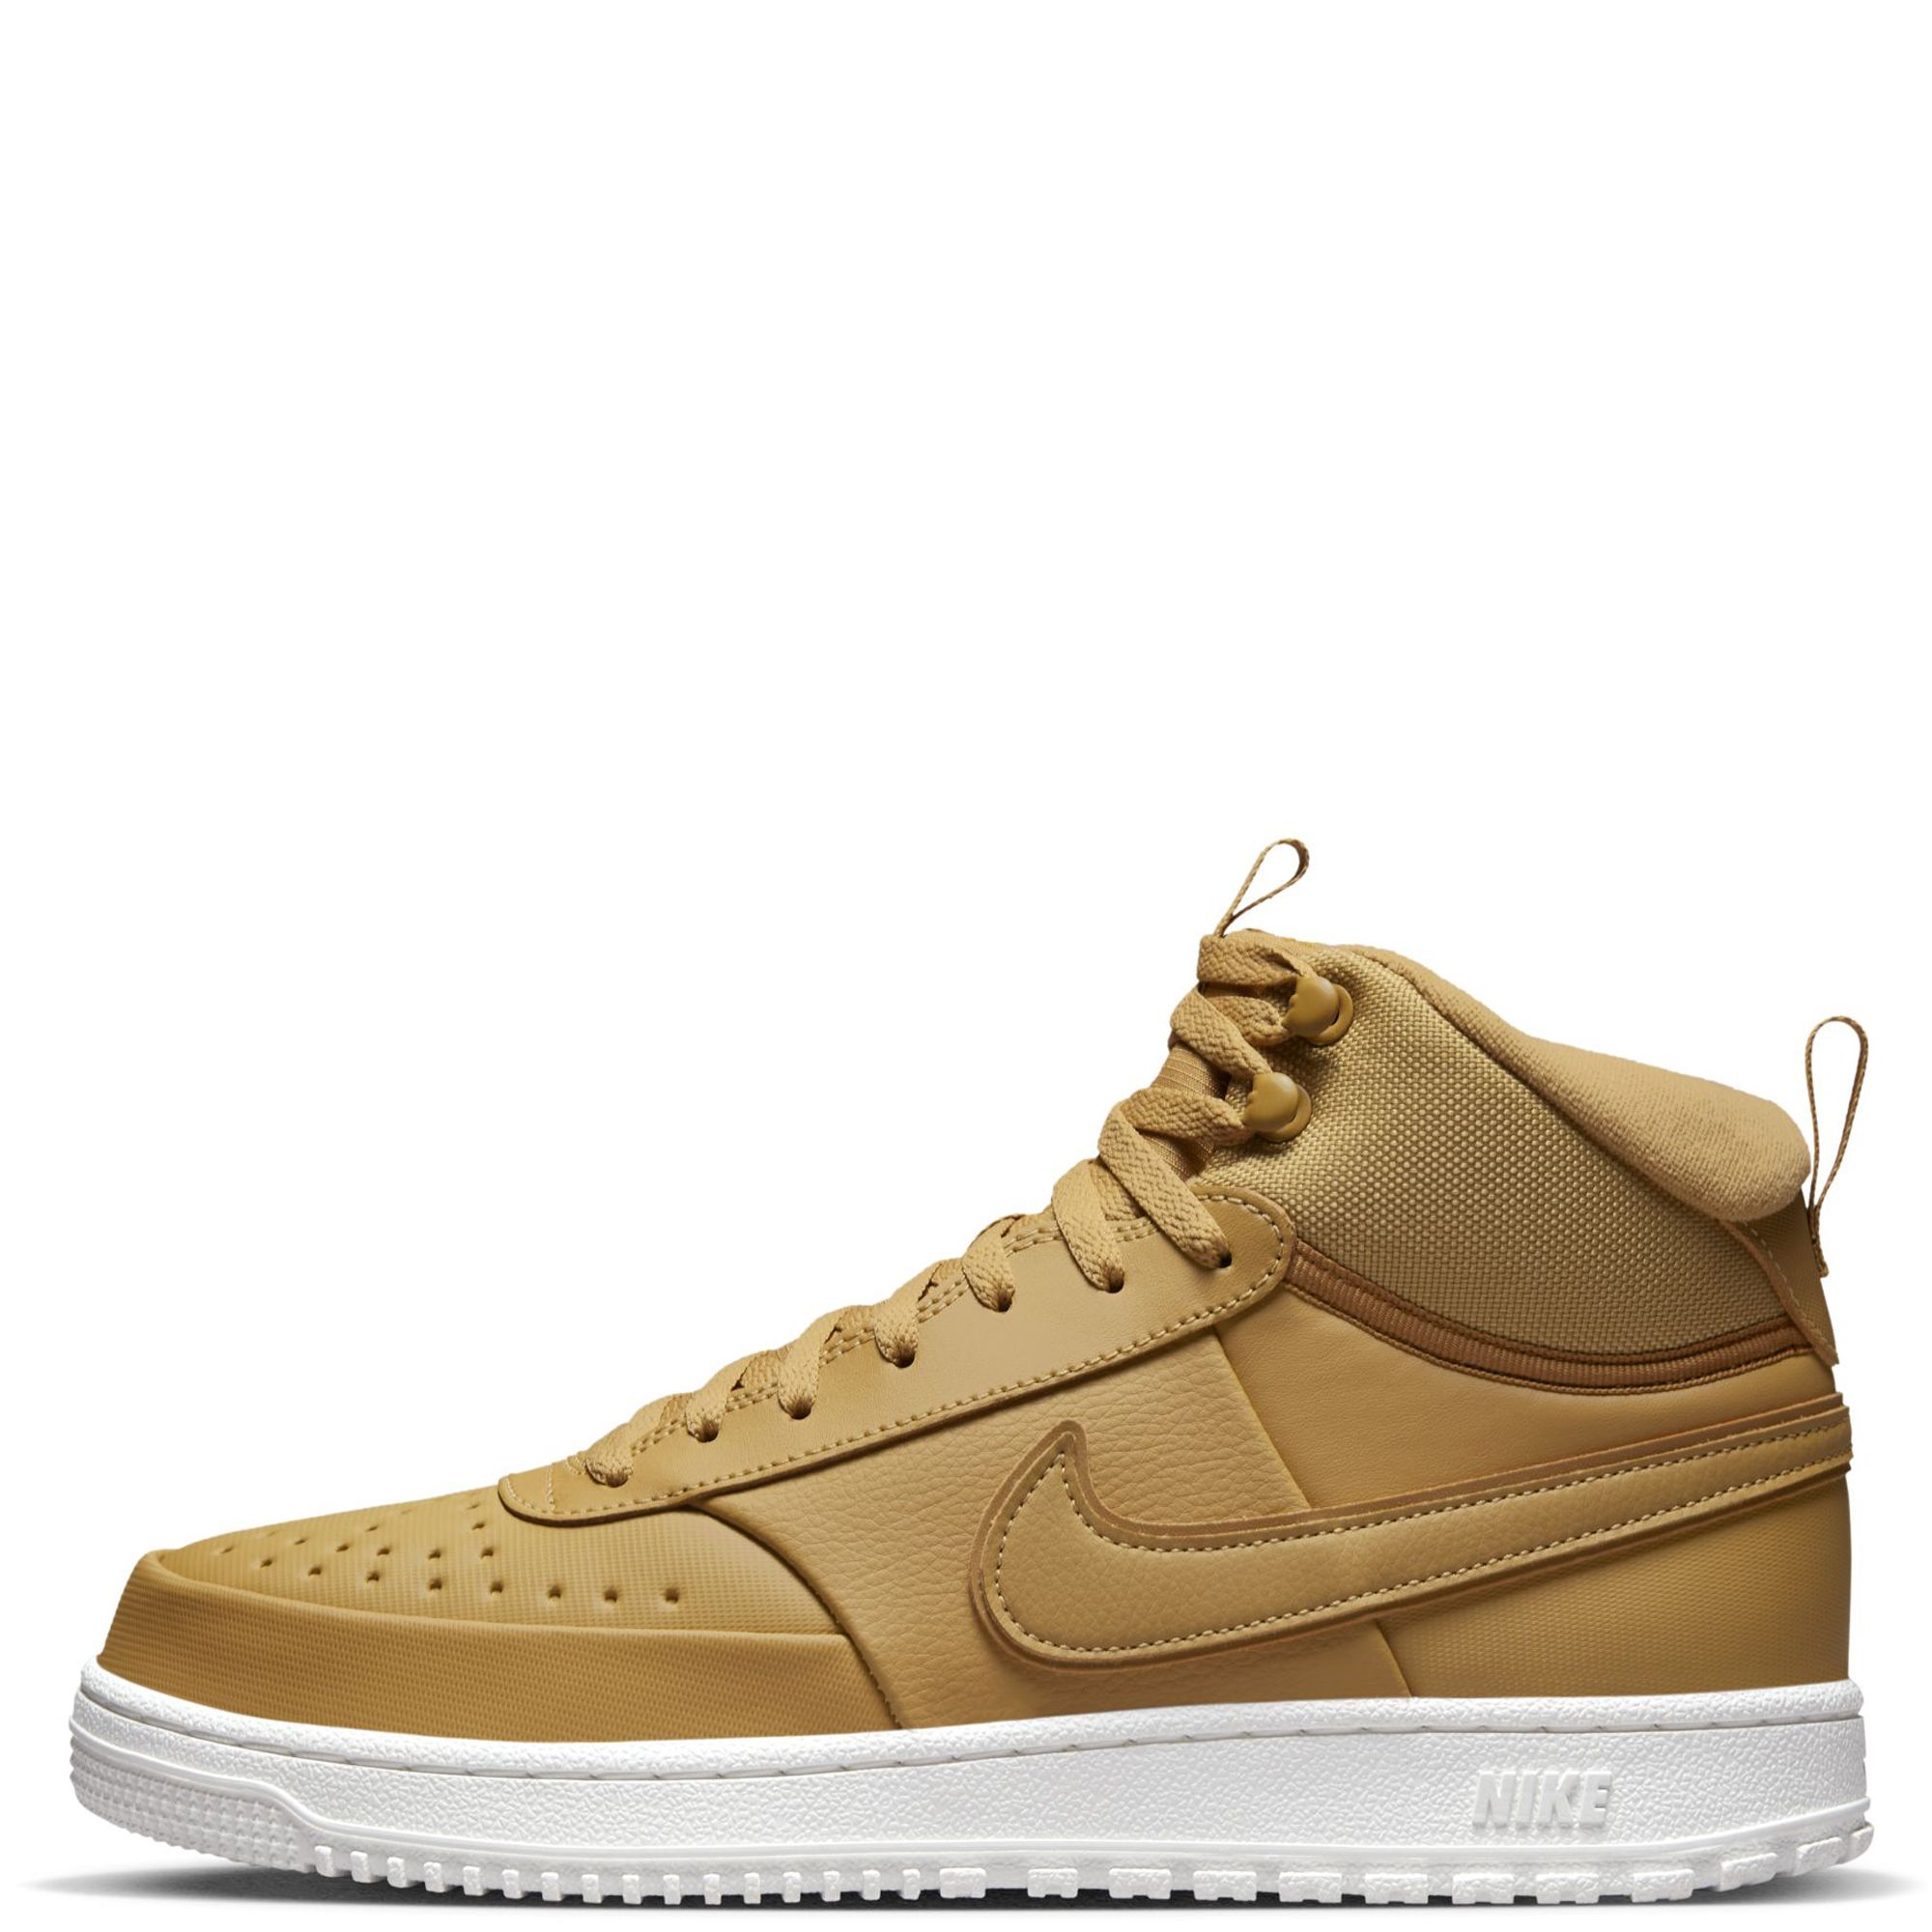 Nike's Air Force 1 High EMB Phantom Elemental Gold Is Inspired By